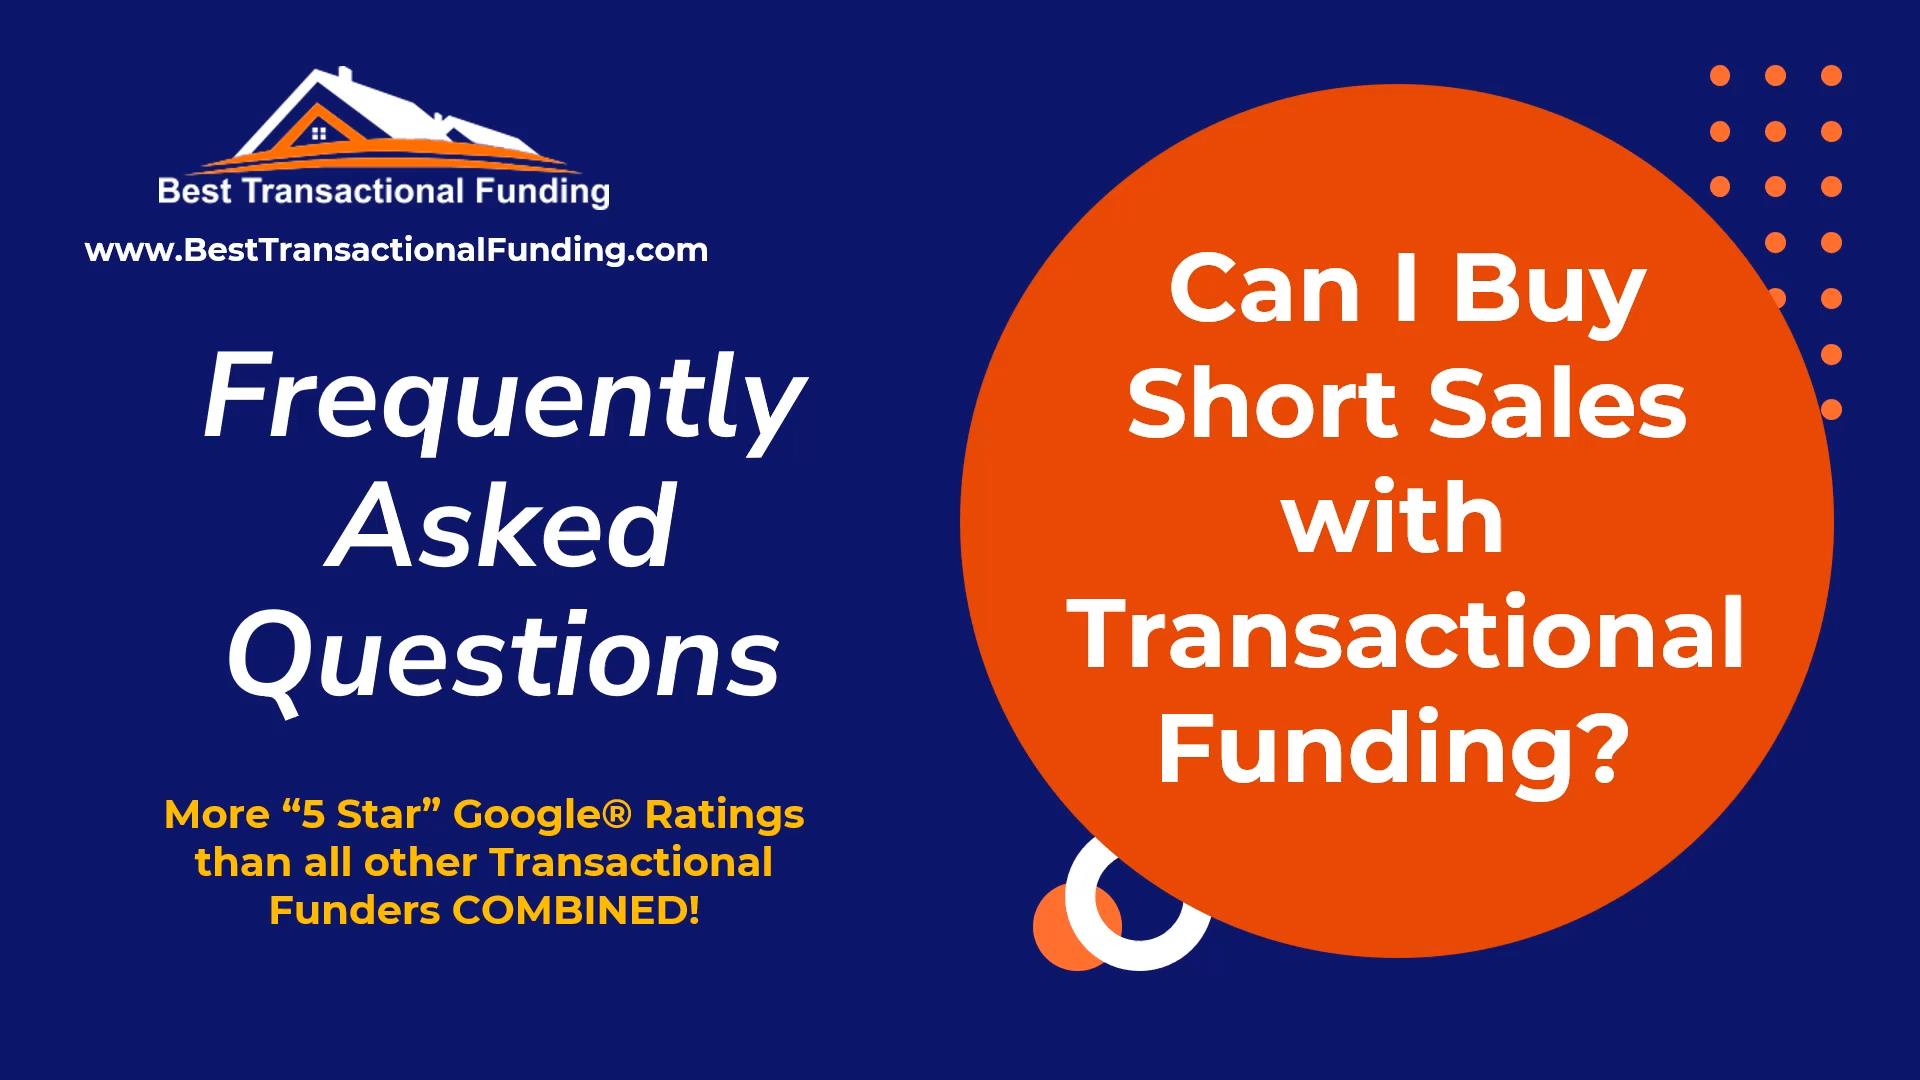 Buy Short Sales with Transactional Funding